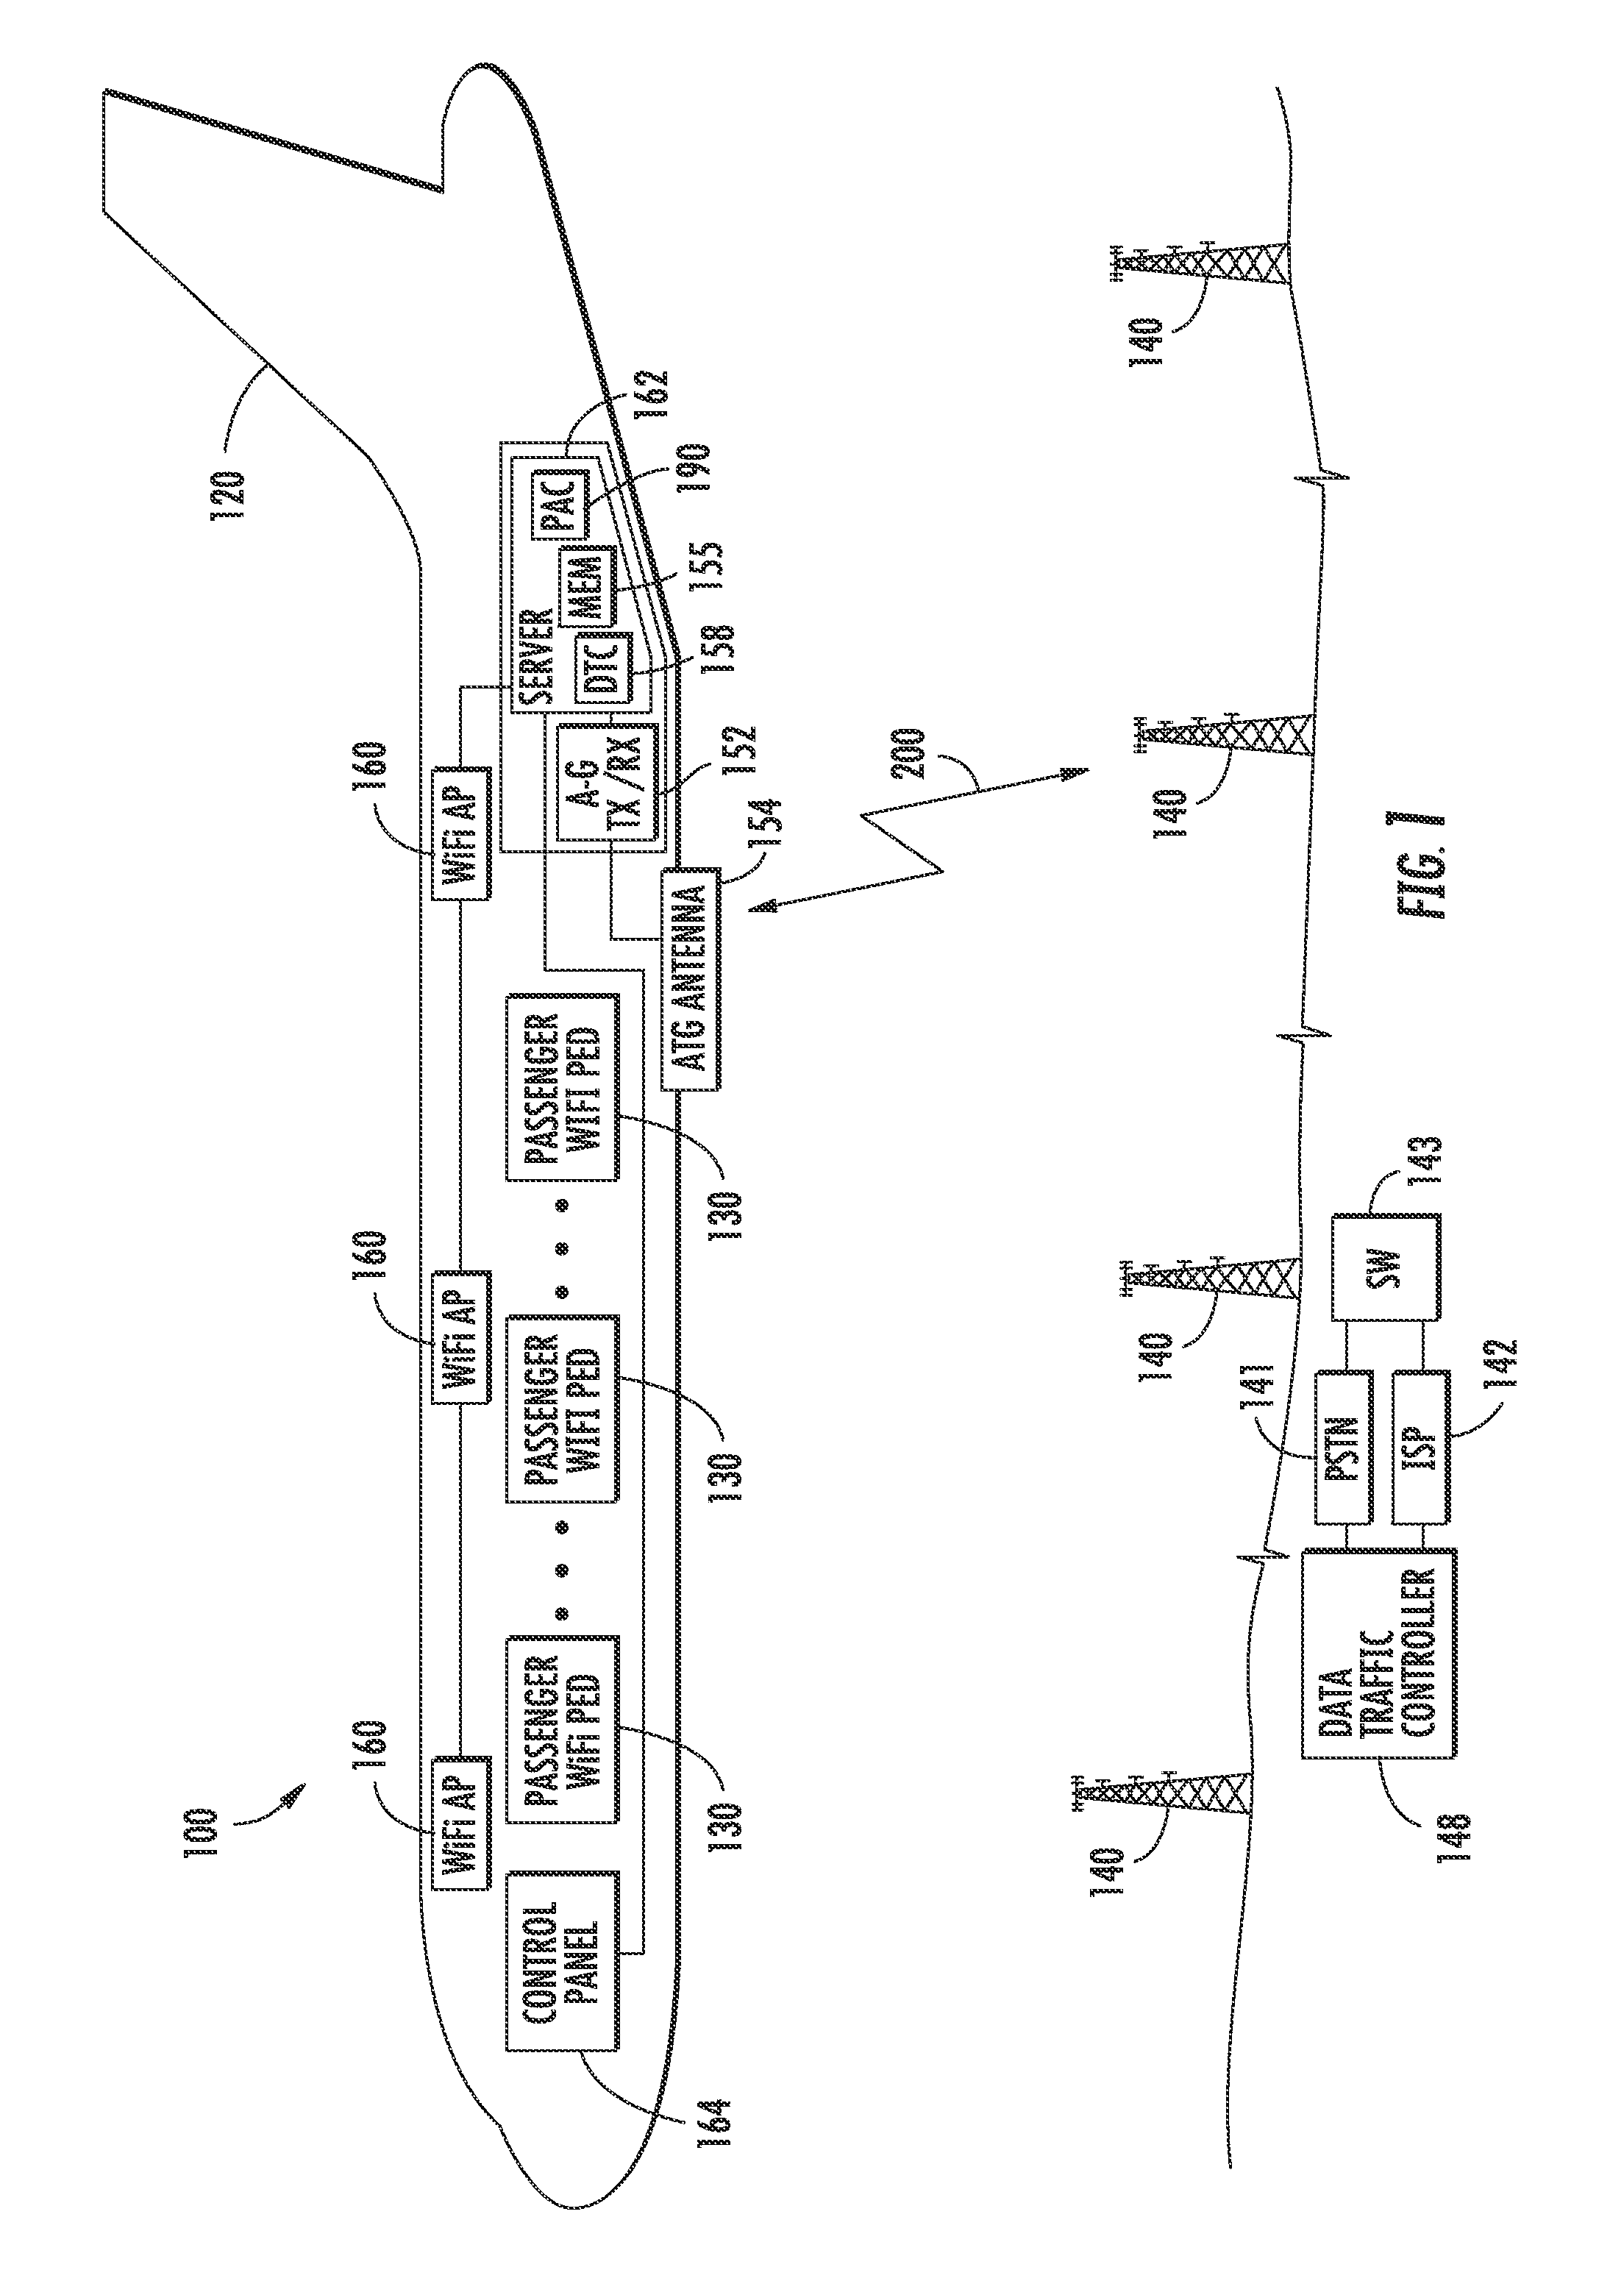 Registration of a personal electronic device (PED) with an aircraft IFE system using a PED generated registration identifier and associated methods